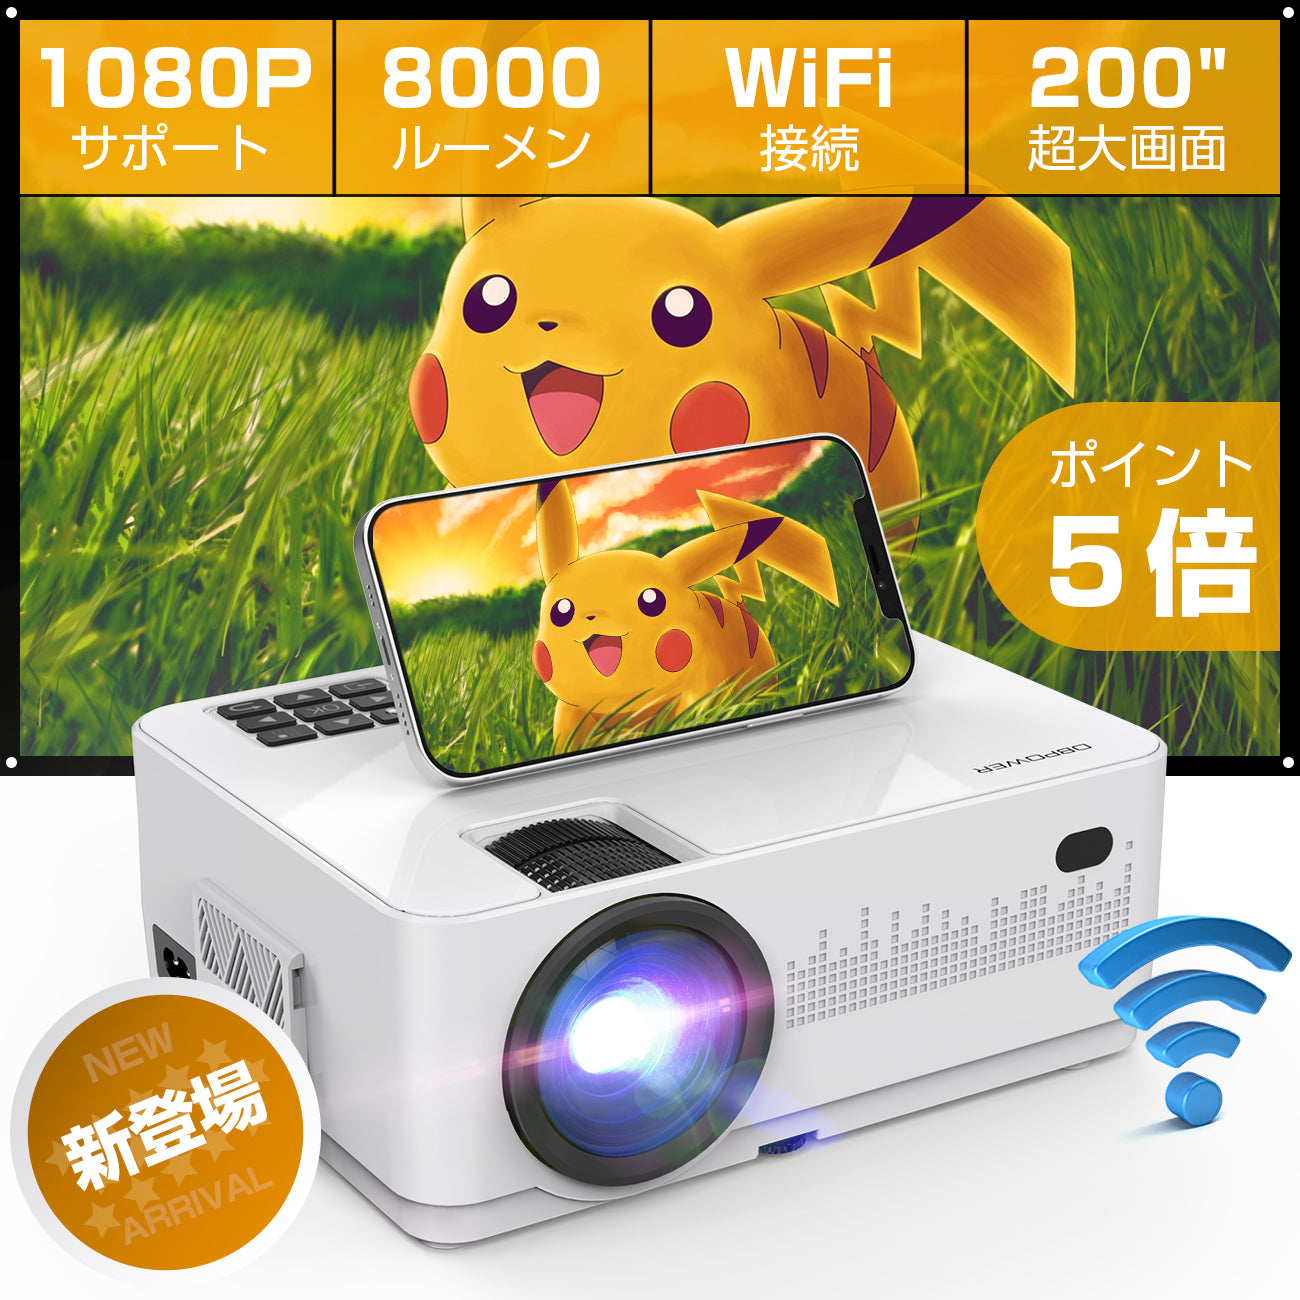 DBPOWER WiFi プロジェクター 8000lm リアル1920×1080P解像度 WiFi接続可 iOS Android両方対応 交 - 4